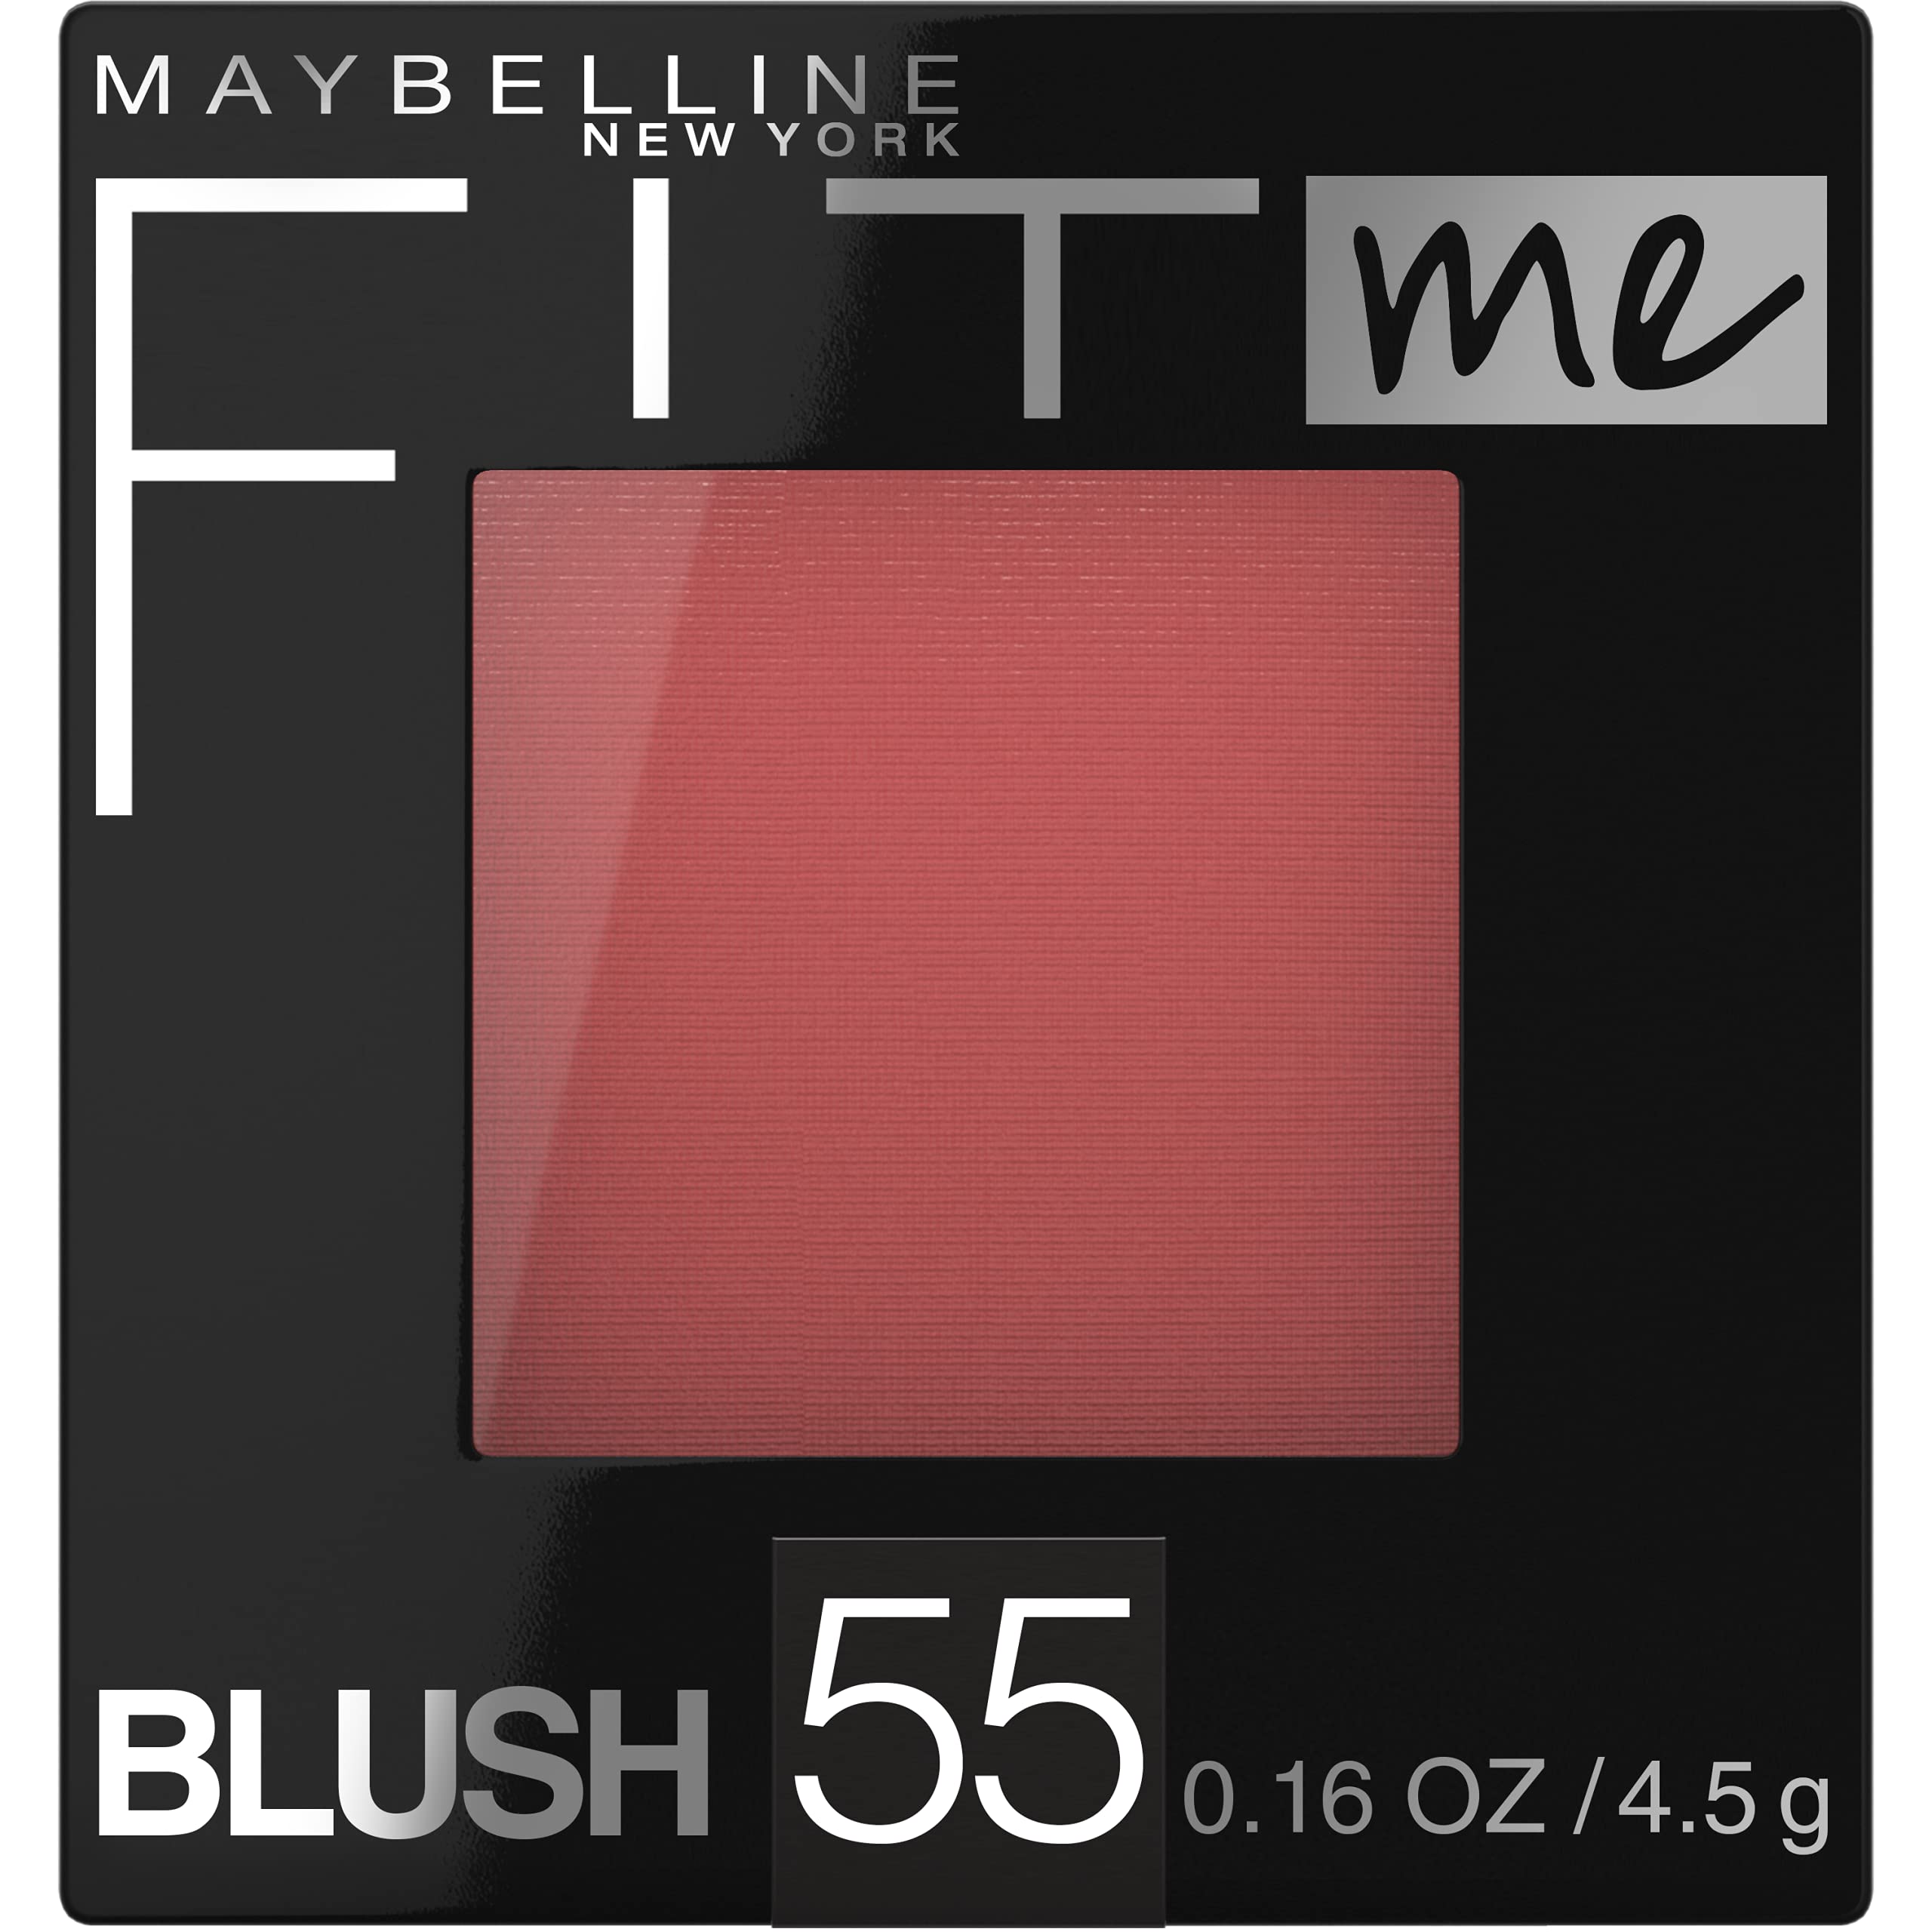 Maybelline Fit Me Powder Blush, Lightweight, Smooth, Blendable, Long-lasting All-Day Face Enhancing Makeup Color, Berry, 1 Count